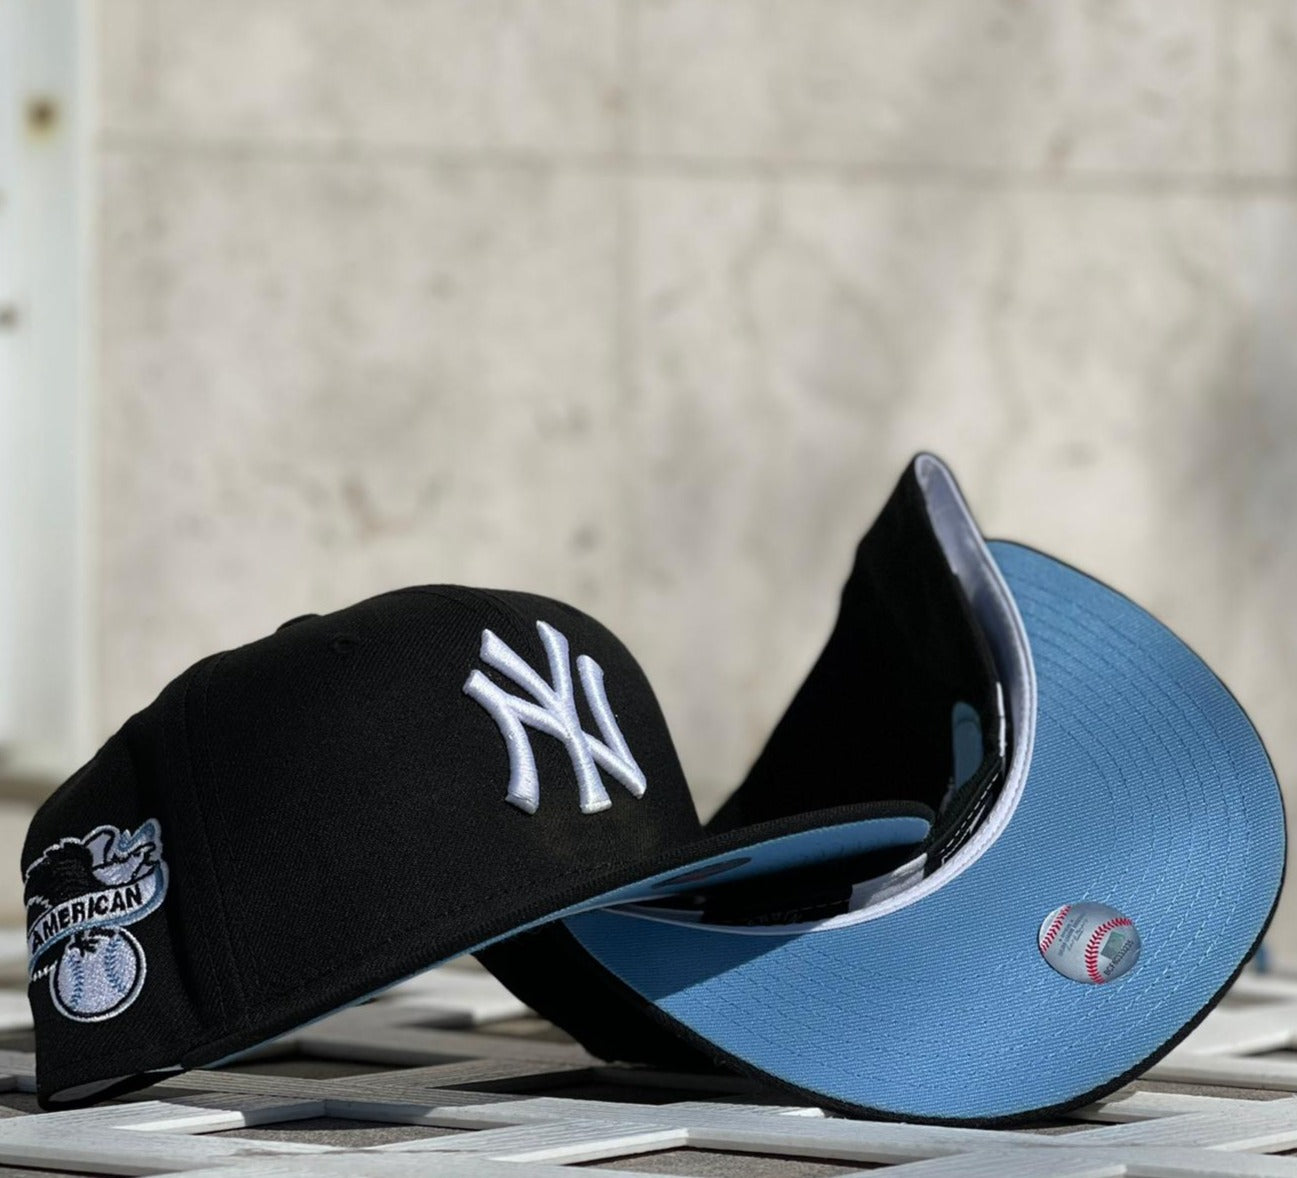 Yankees 99 WS New Era 59FIFTY Black Fitted Hat Royal Blue Bottom – USA CAP  KING